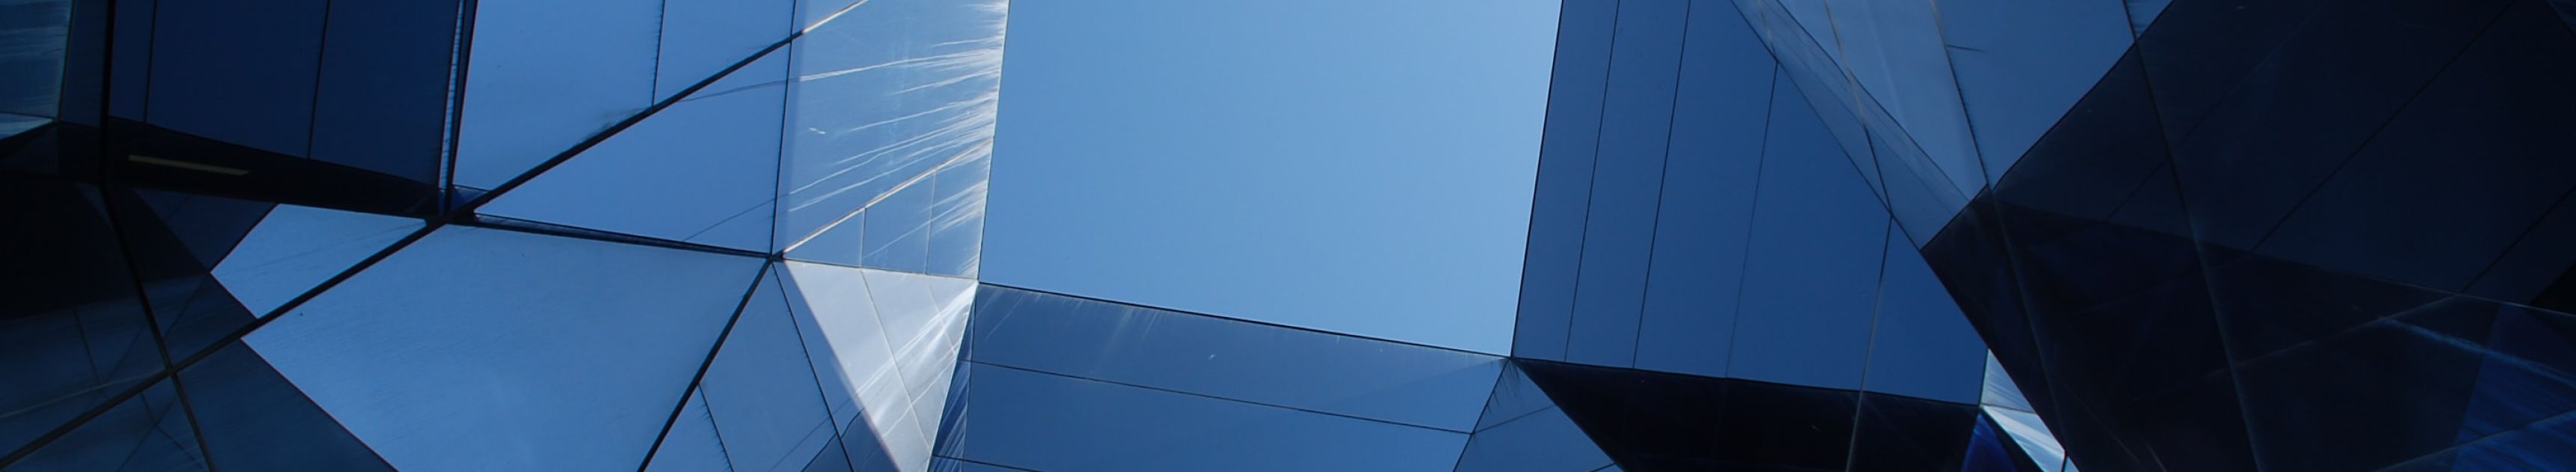 Blue glass building abstract